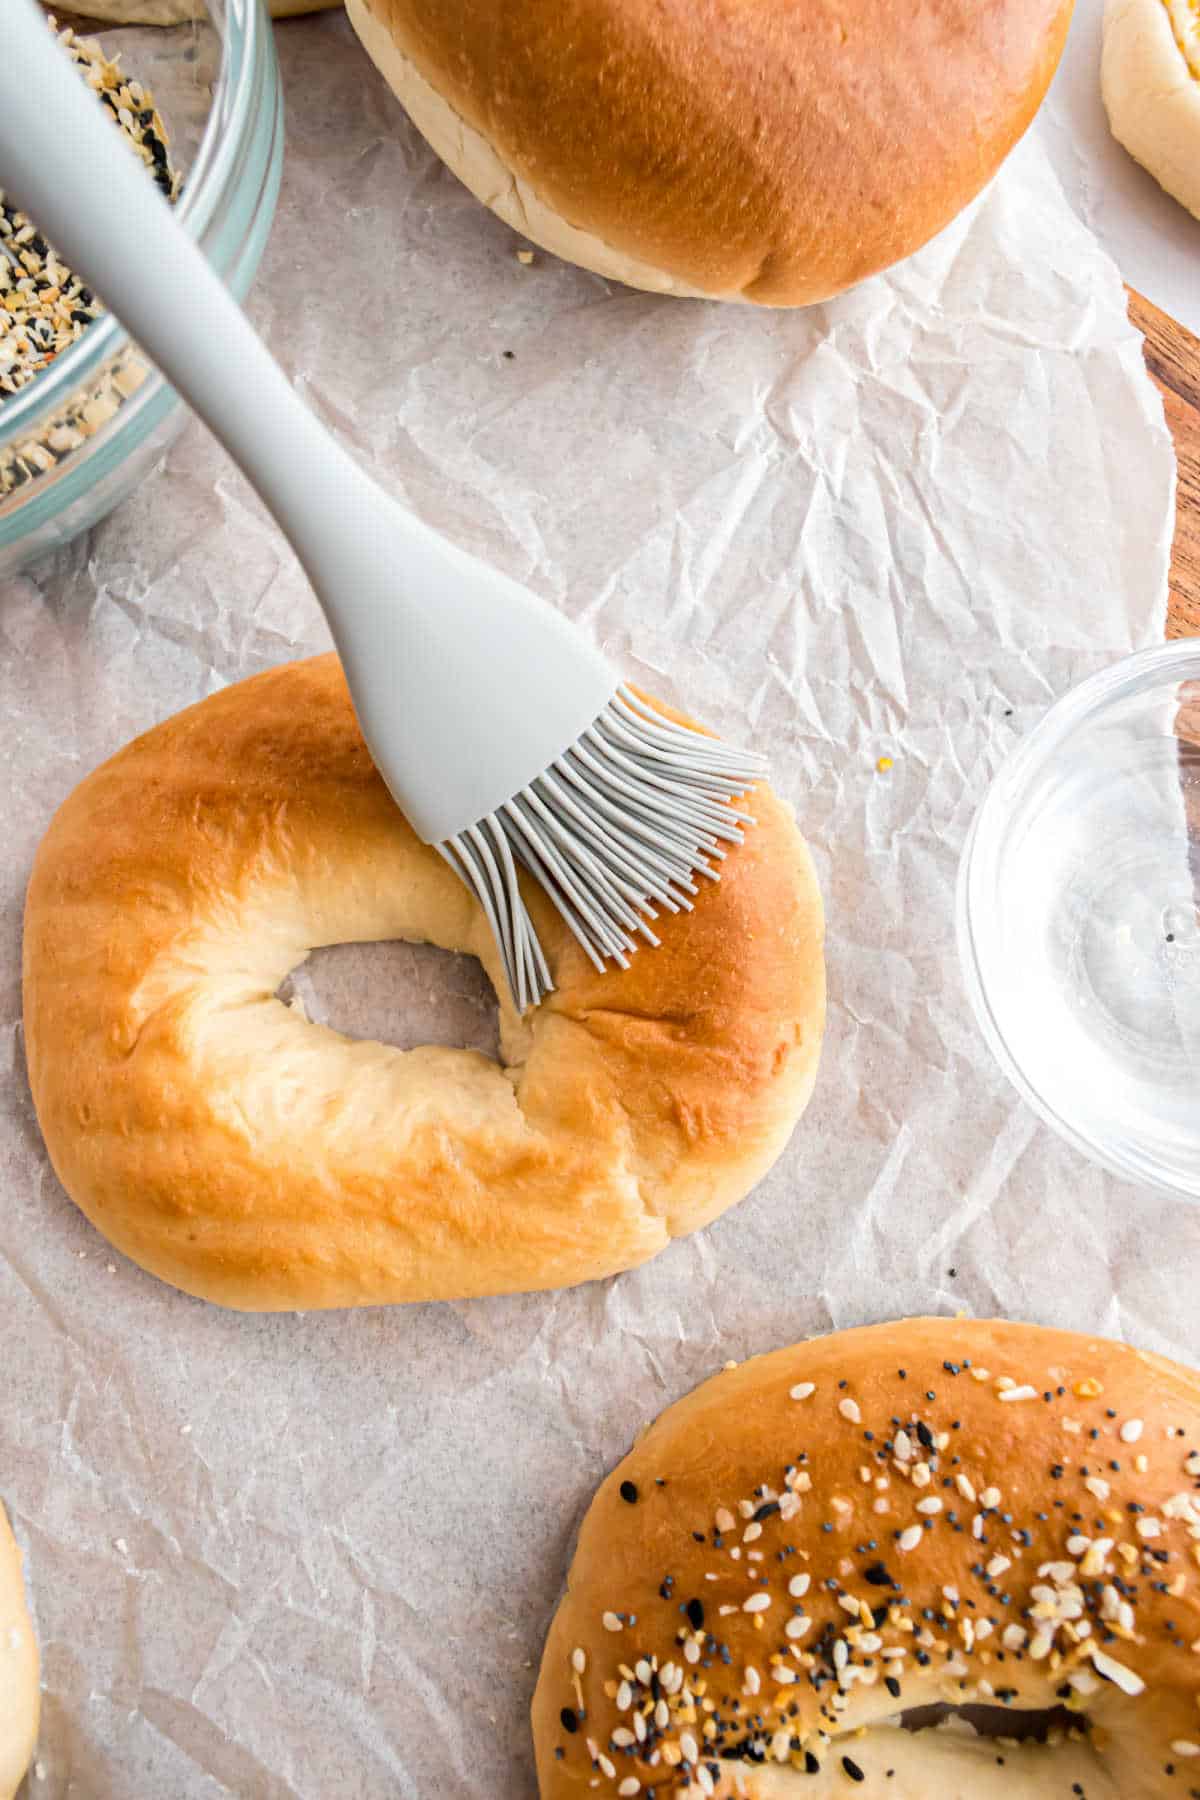 Pastry brush on a bagel with seasoning mix in a bowl.